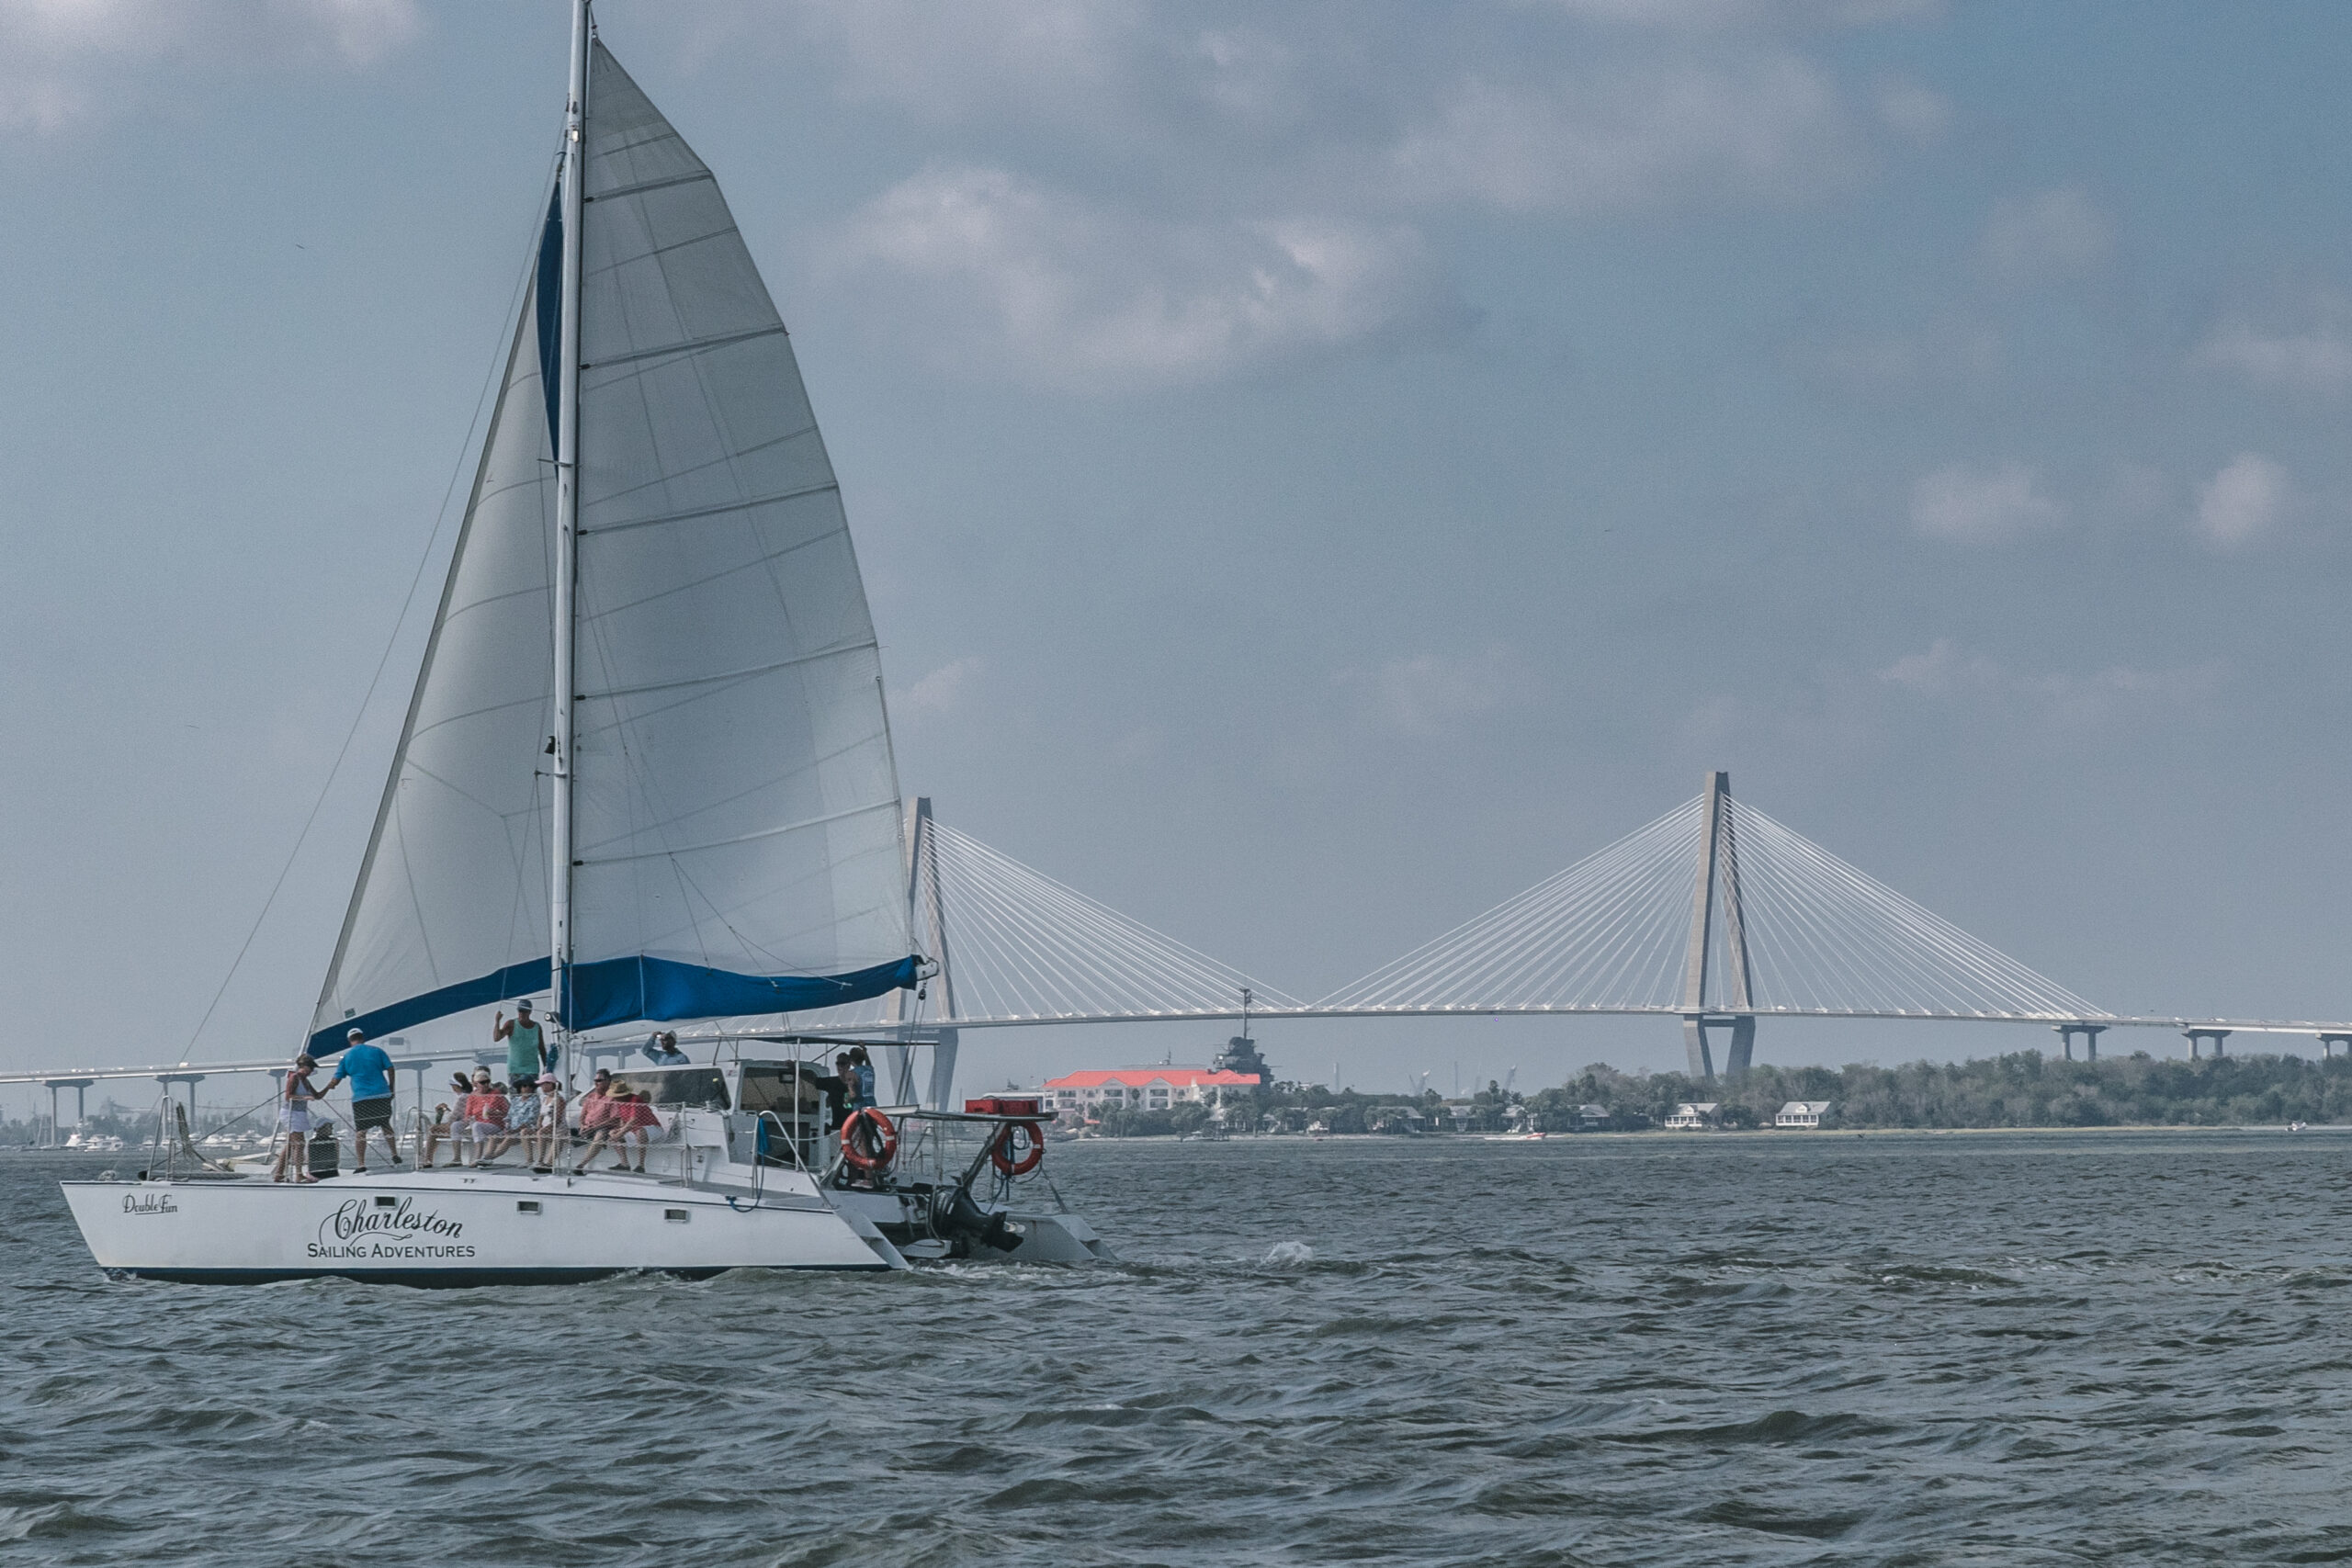 Double Fun sailing with Cooper River bridge in background